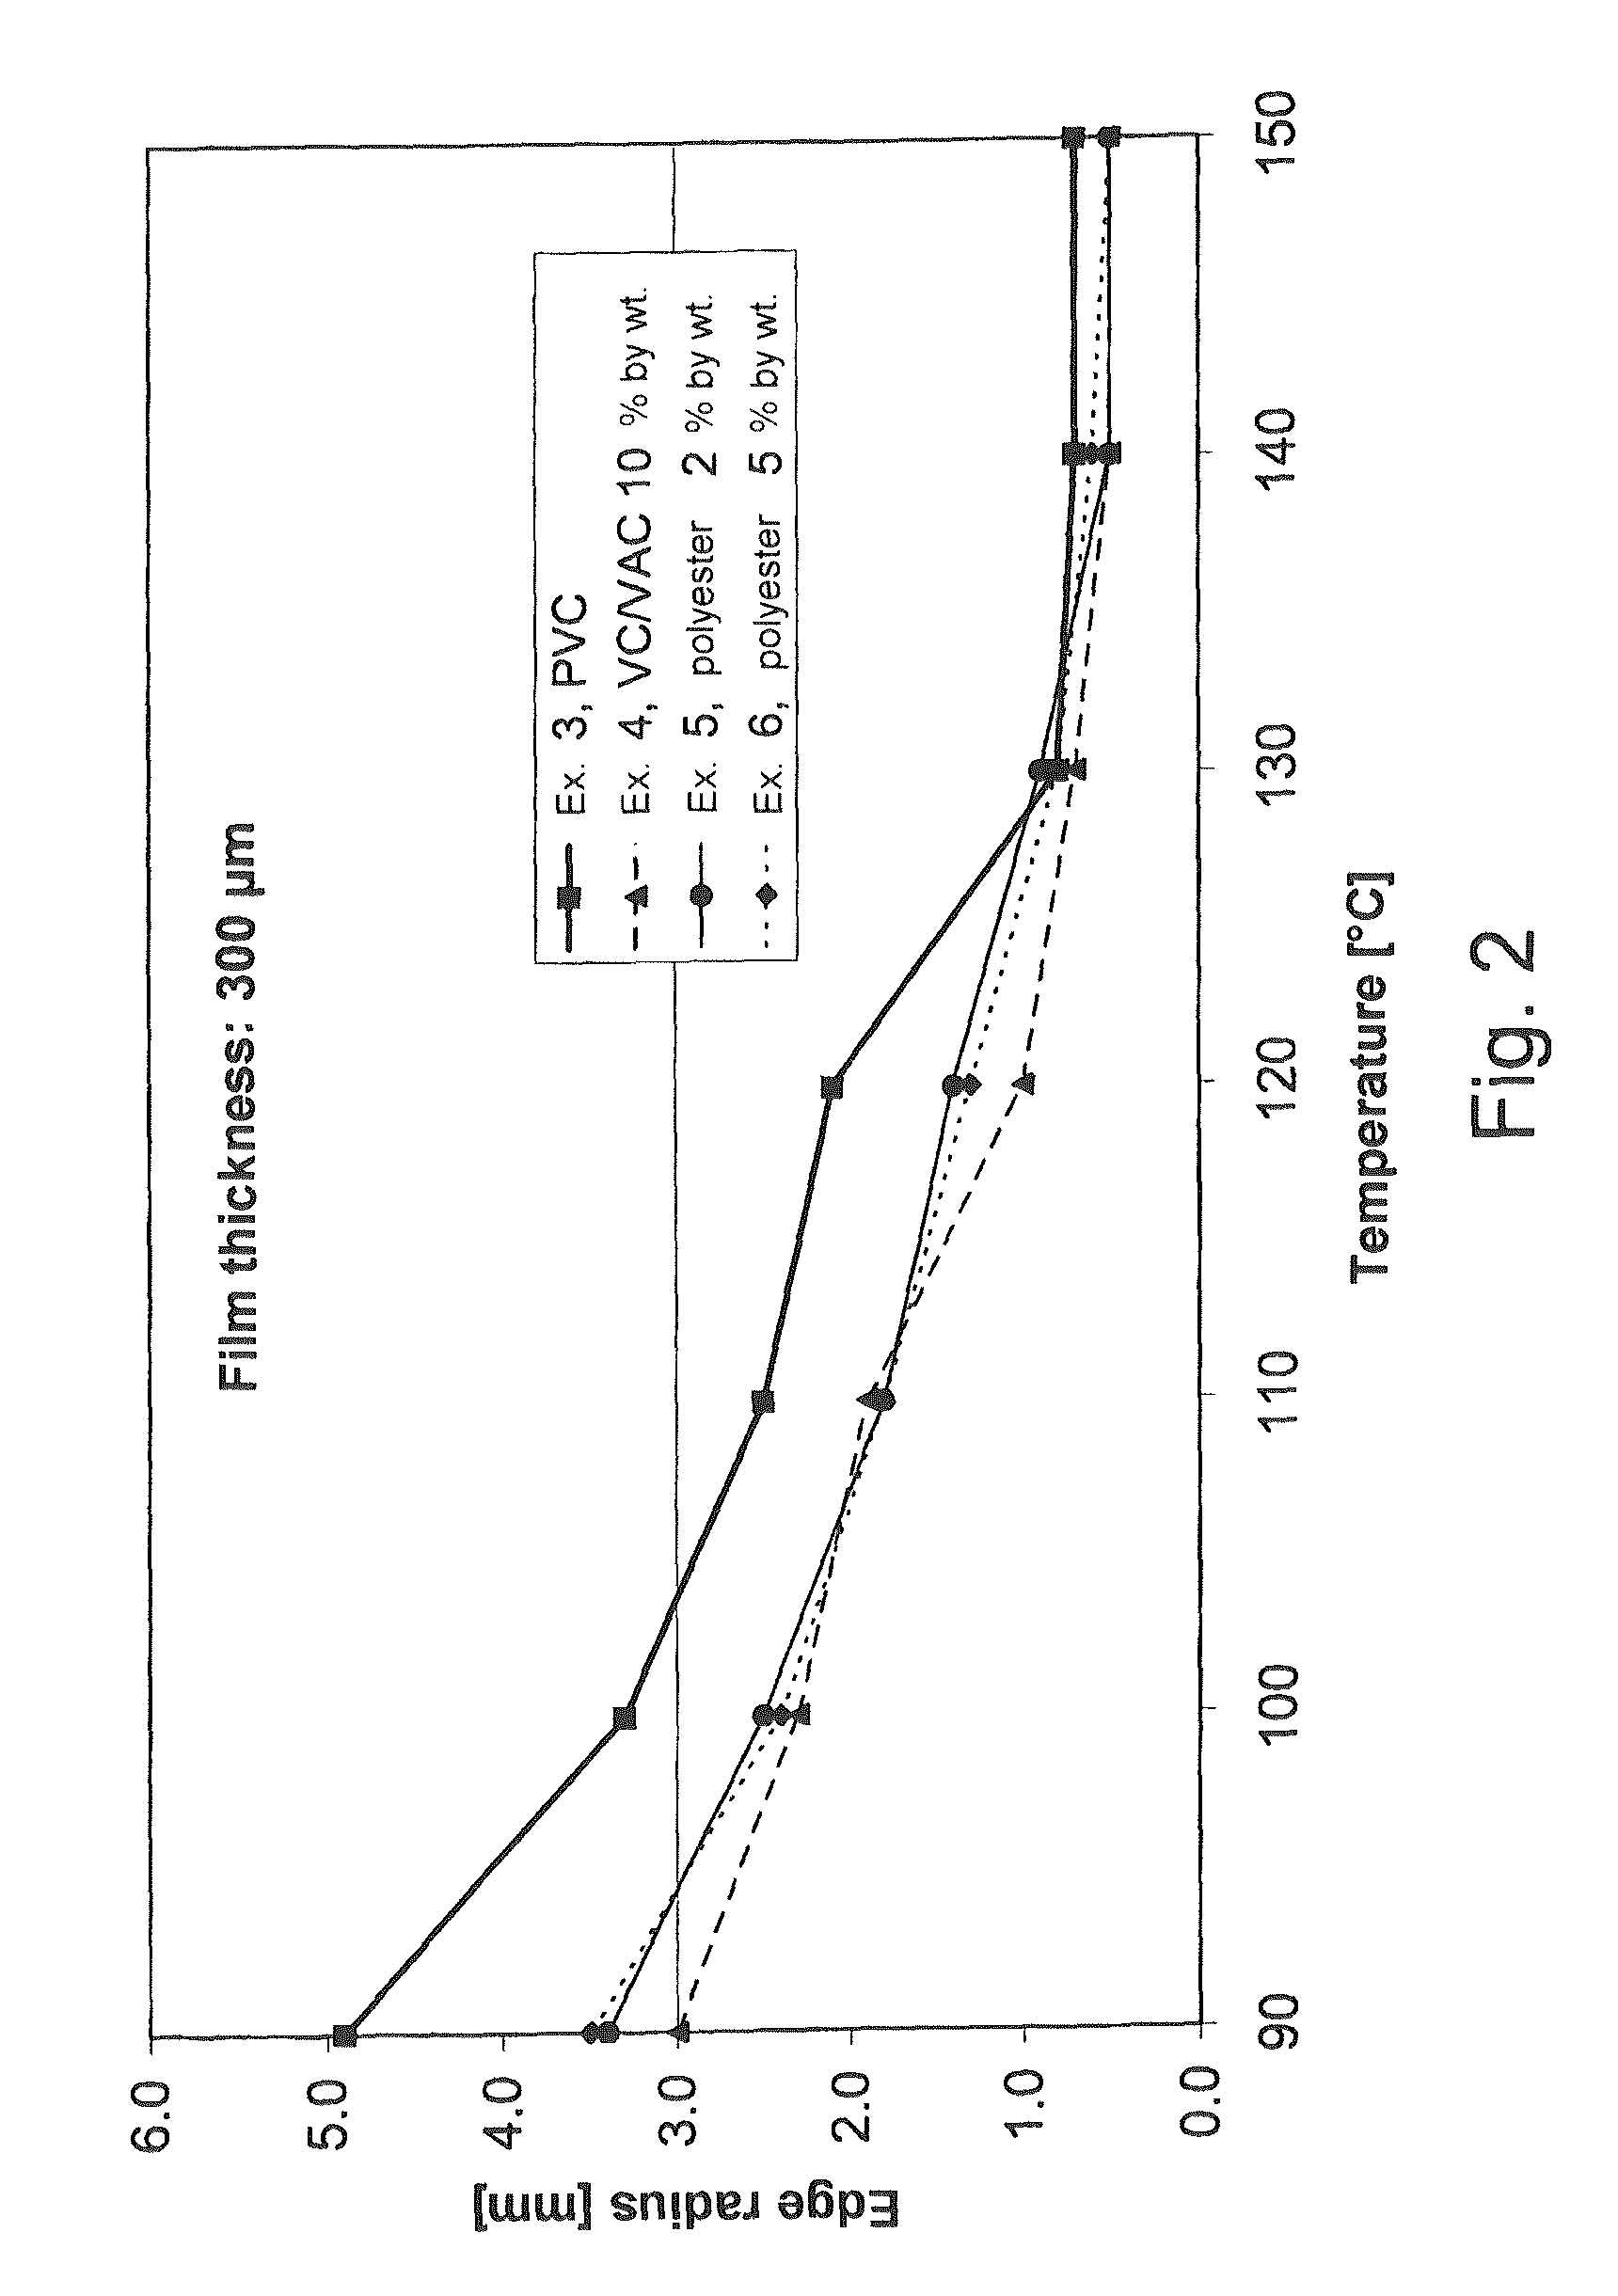 Vinyl chloride polymer film and method for producing same